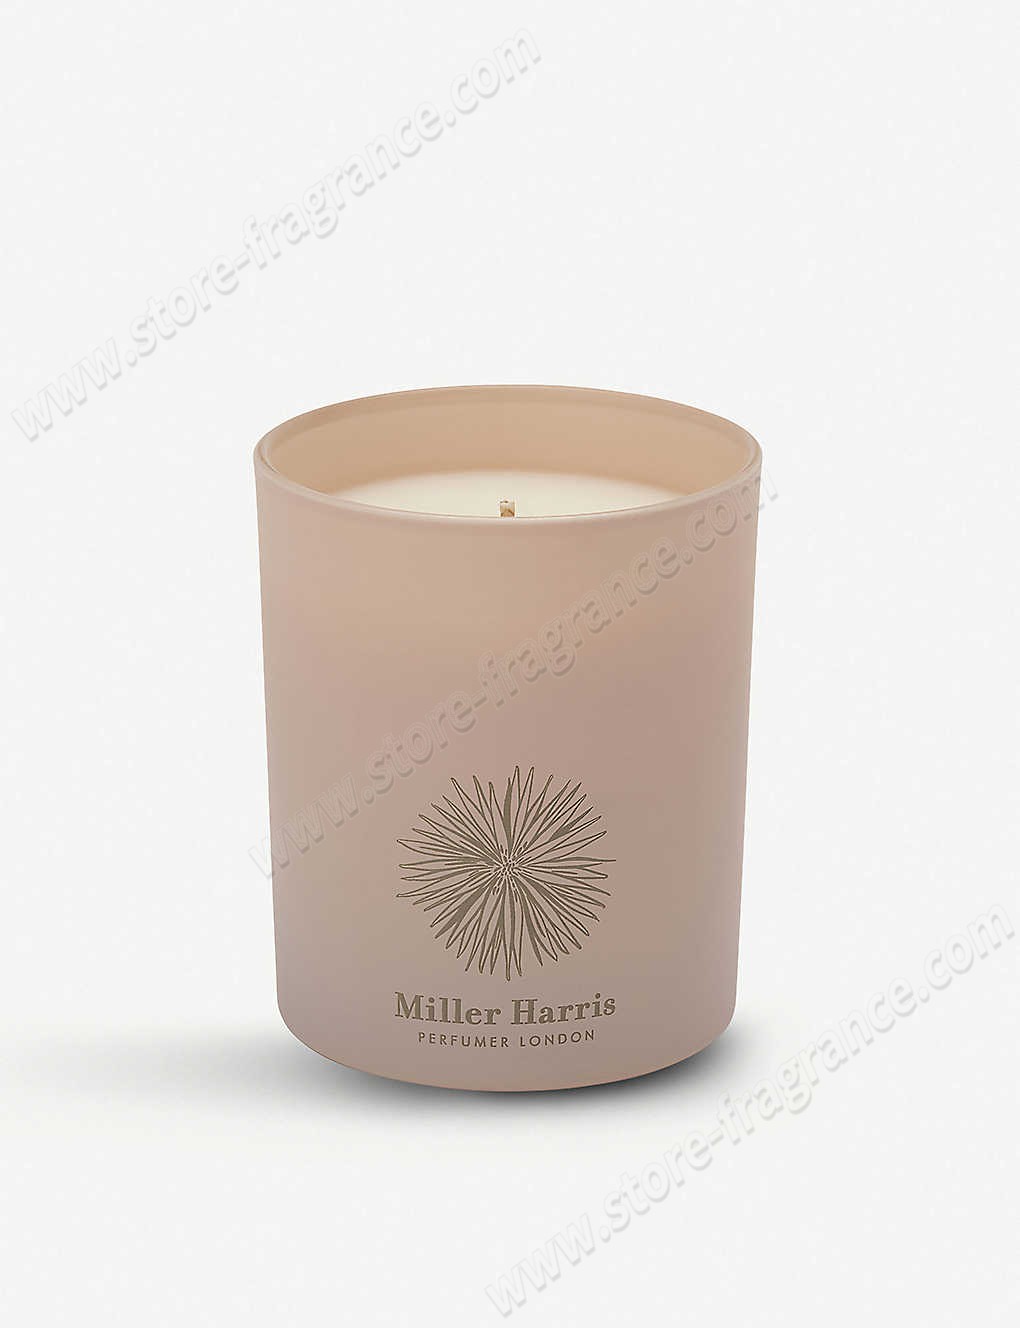 MILLER HARRIS/Digne de Toi scented home candle 185g ✿ Discount Store - MILLER HARRIS/Digne de Toi scented home candle 185g ✿ Discount Store